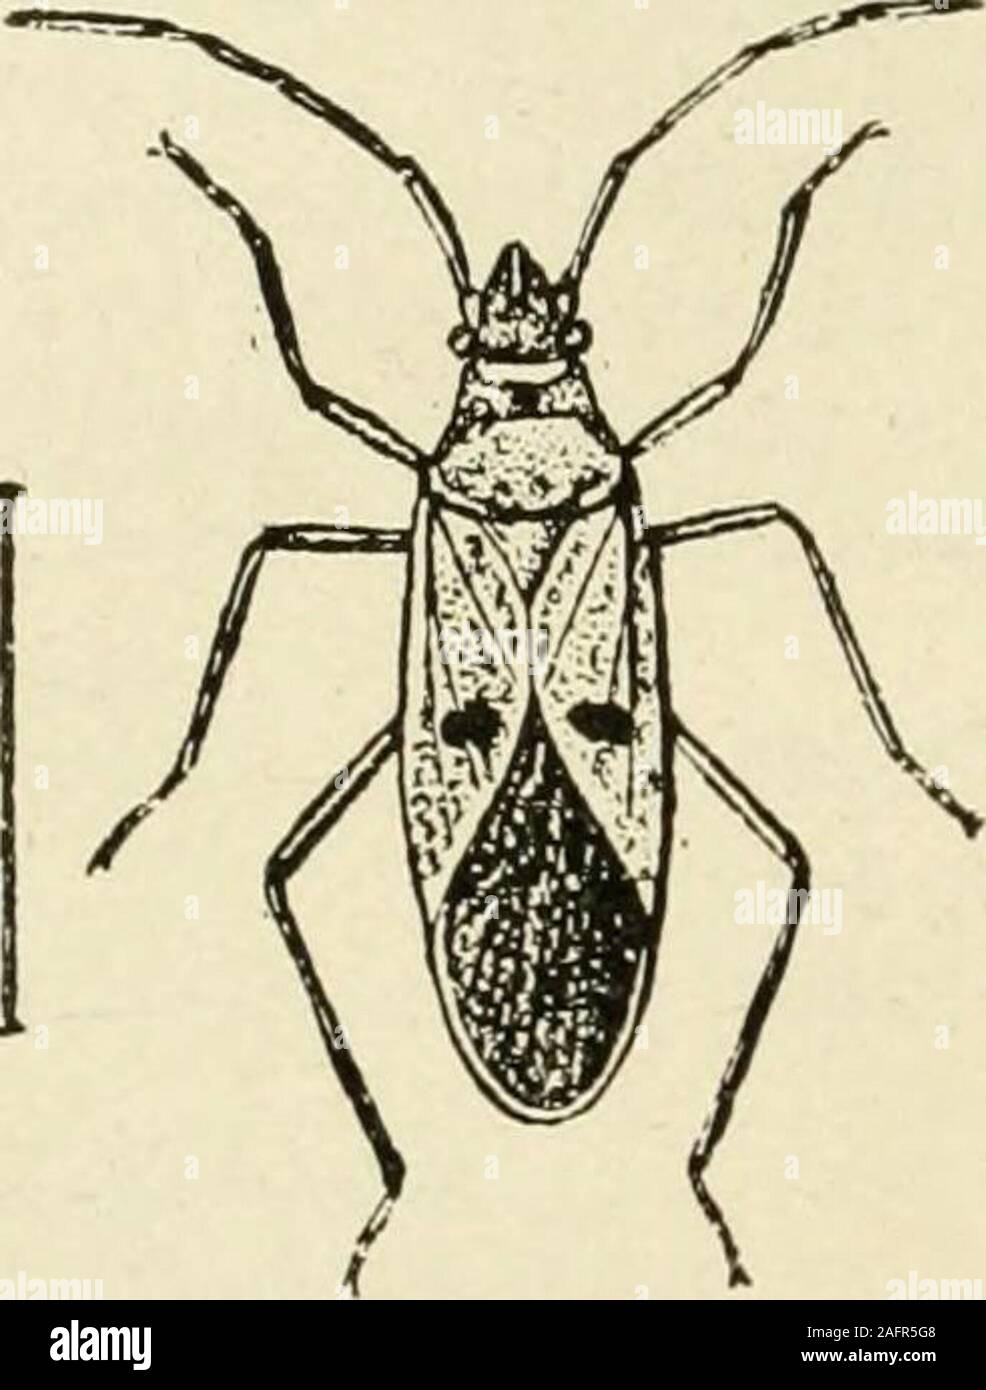 . A manual of dangerous insects likely to be introduced in the United States through importations. a 6-7 mm. long, shining yellowish white. Distribution: Europe.Sorauer, p. Handbuch der Pflanzenkrankheiten, 3d ed., 1913, vol. 3, p. 411.b. important corn pests.hemiptera. Cereopidse. Tomaspis varia Fabrici«3. T. postica Walker, T. lepidior Font.; South America. (See Sugar cane.) coleoptera. Elateridse. Agriotfs lintatus Linnaeus. (See Tobacco.) Chrysomelldae. Diabrotica graminea Ballou; Porto Rico; adults very injurious to flowers. Brachyrhinidae. Diaprepes abbreviatus Linnaeus; West Indies. (Se Stock Photo